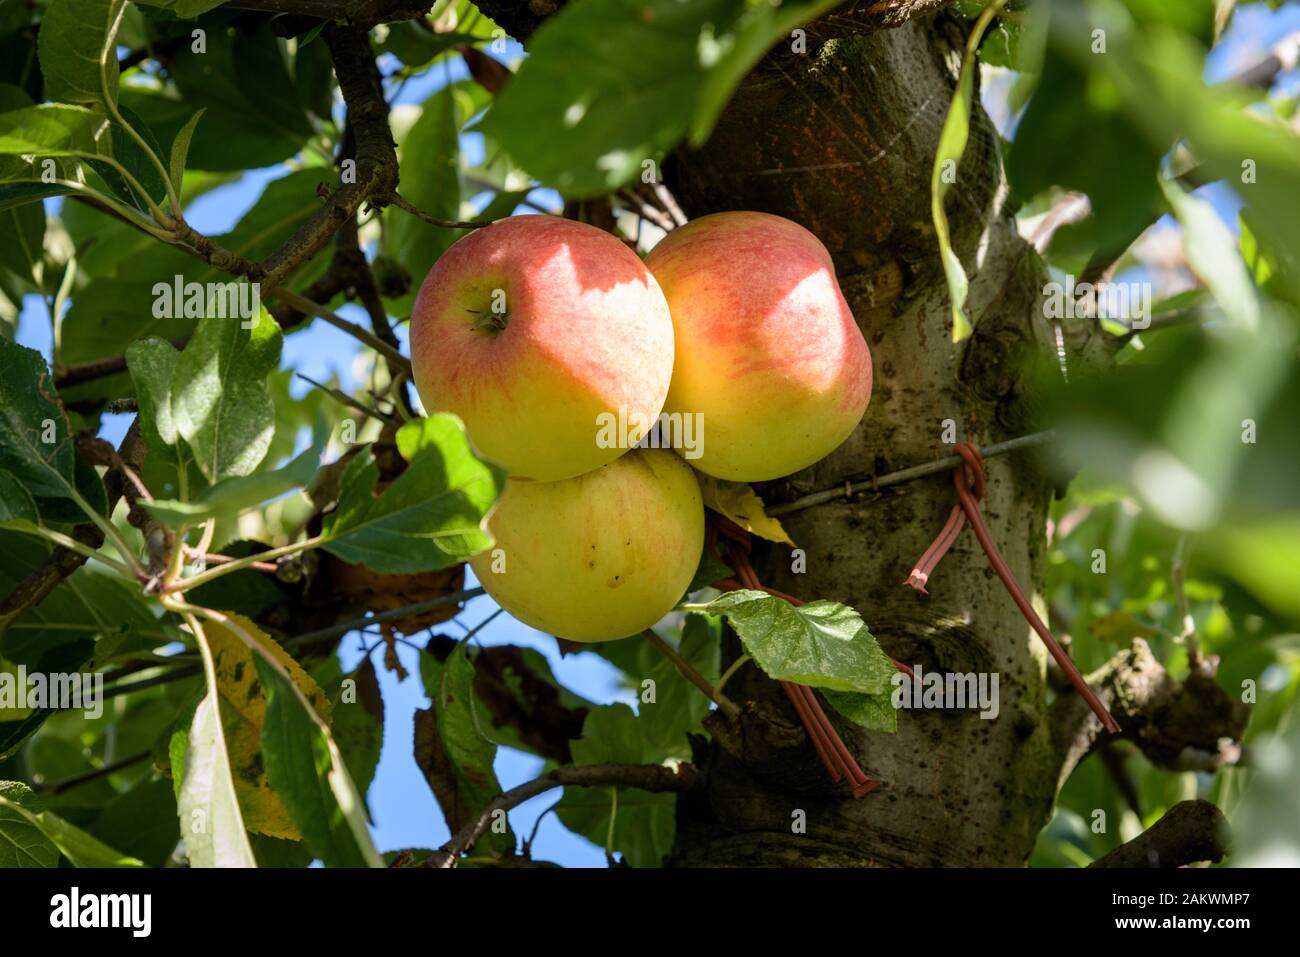 Three ripe apples haning in orchard Stock Photo